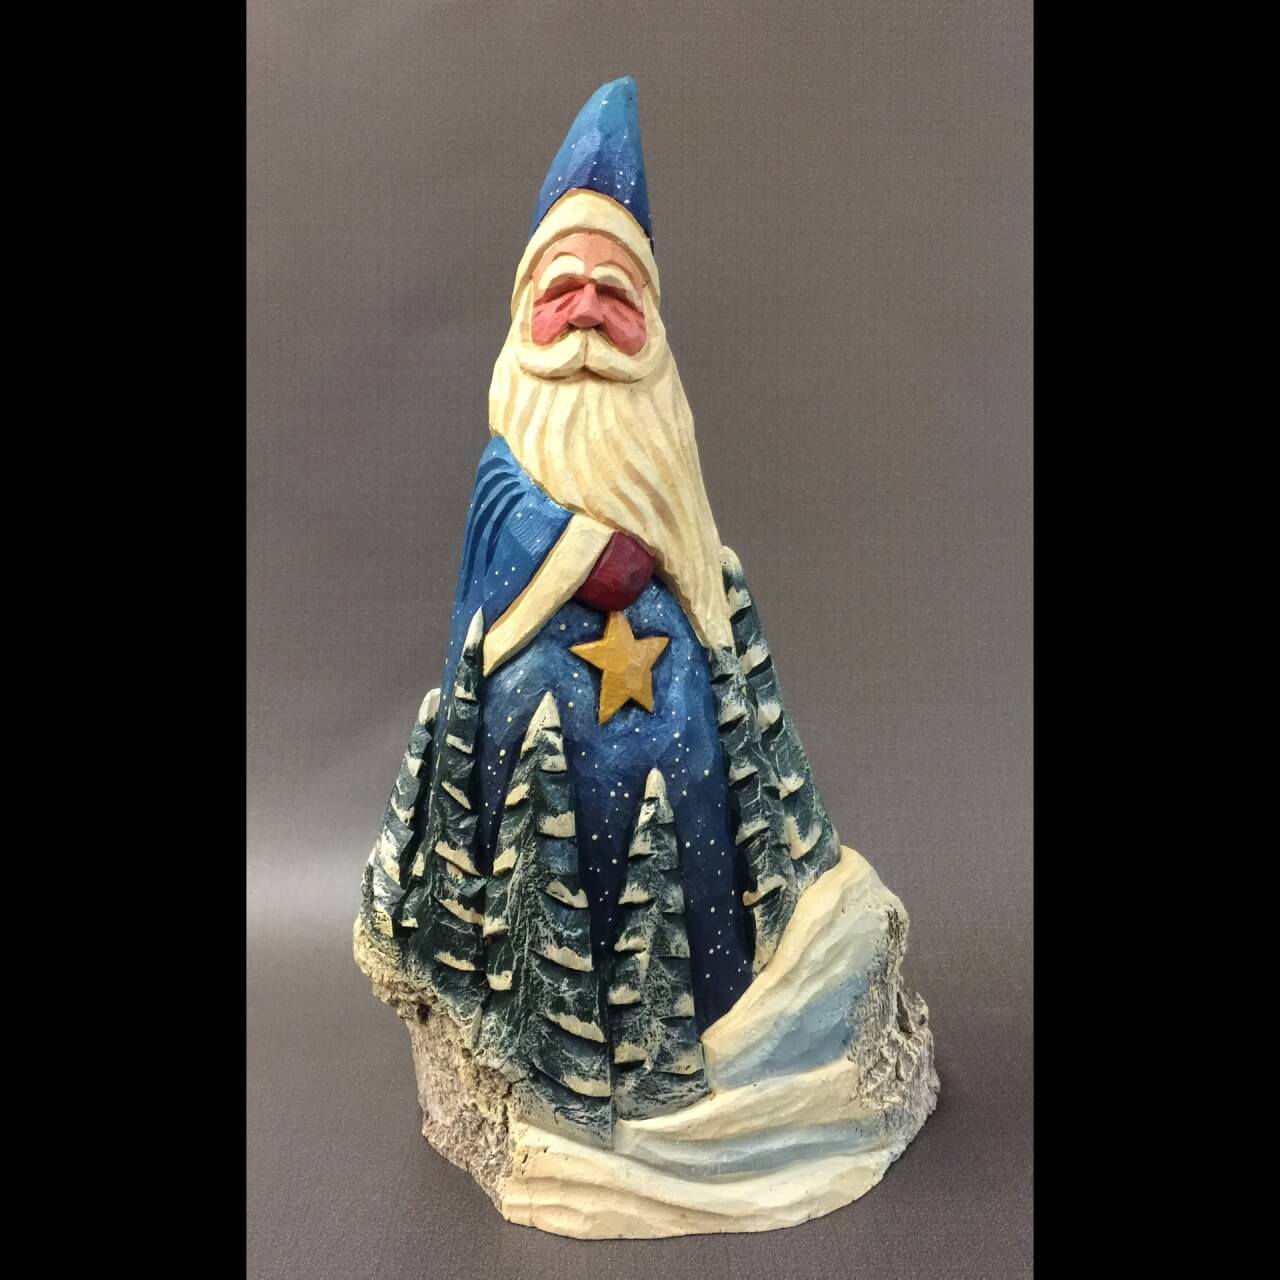 carved santa figure with blue hat and cloak